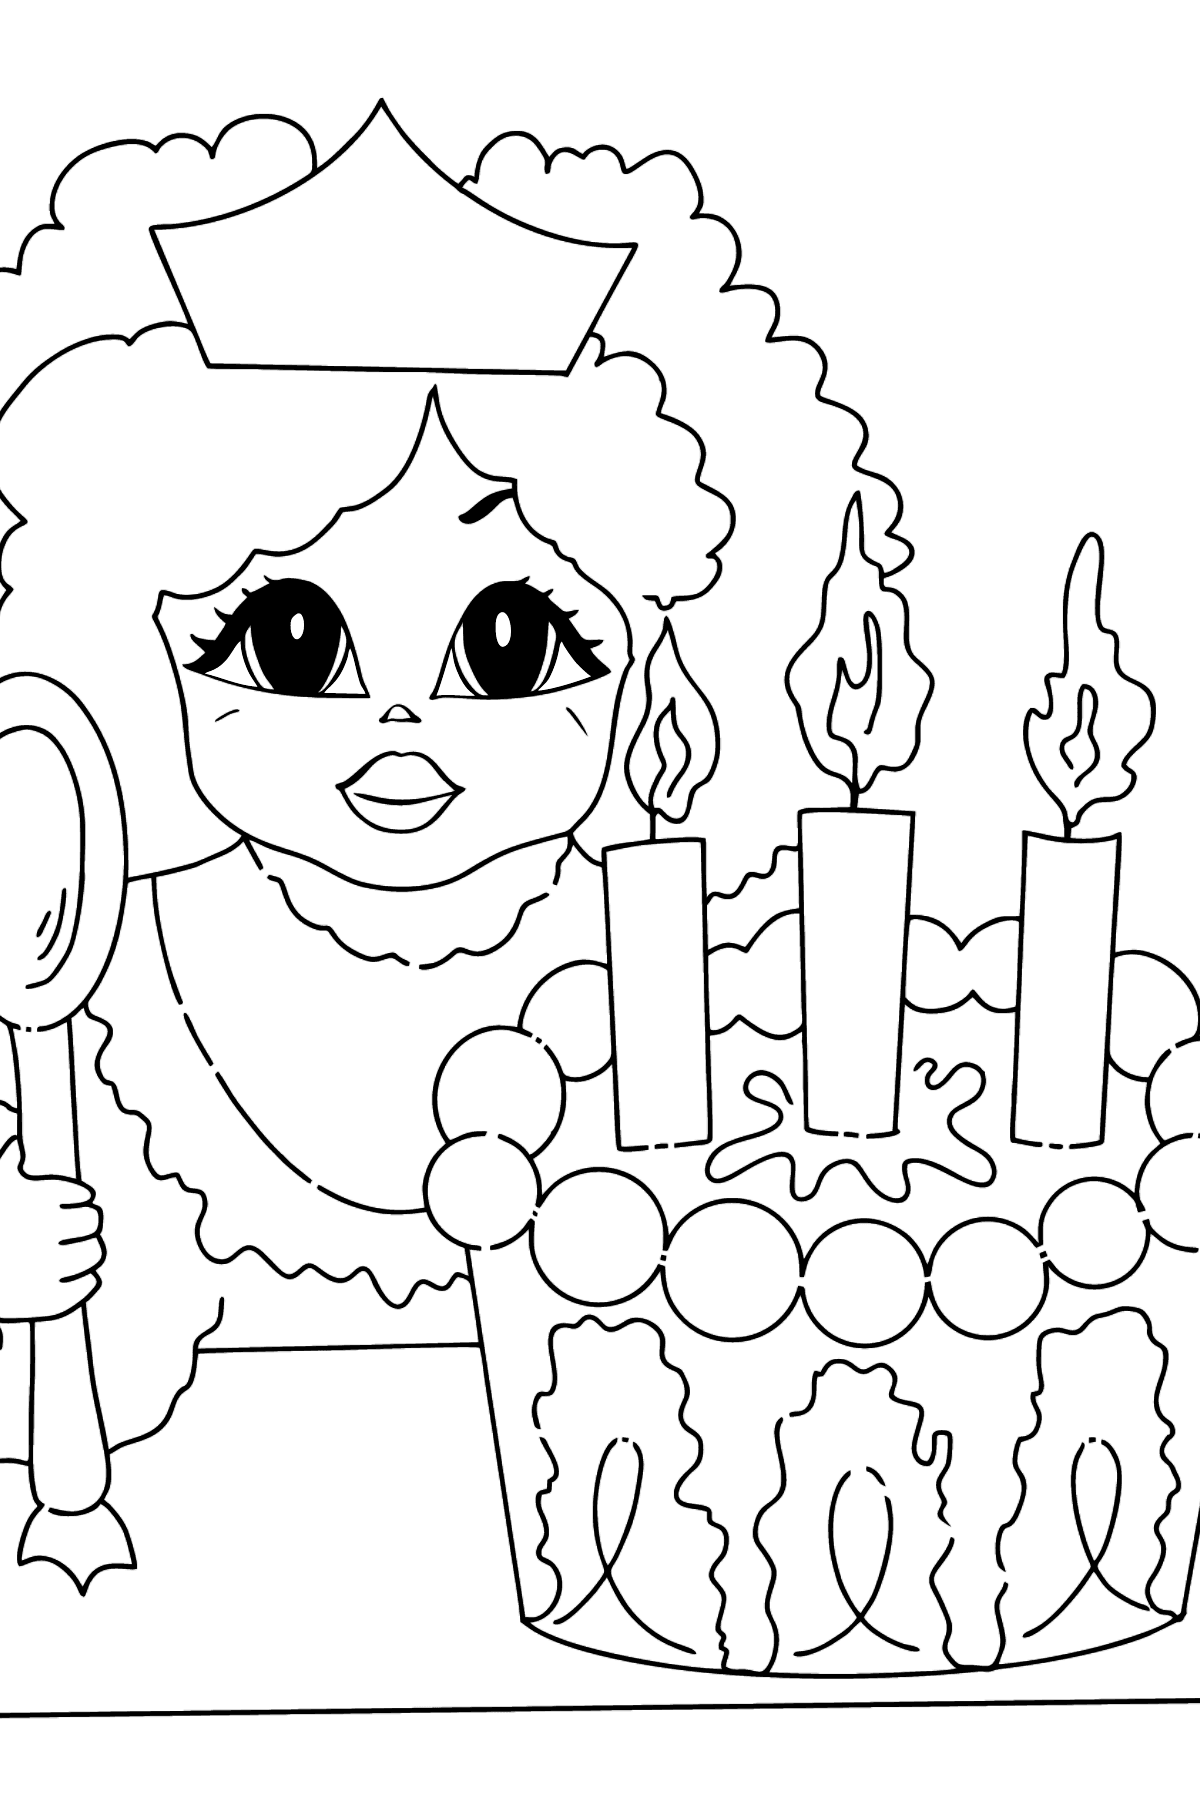 Coloring Page - A Princess with Cake - For Girls - Coloring Pages for Kids